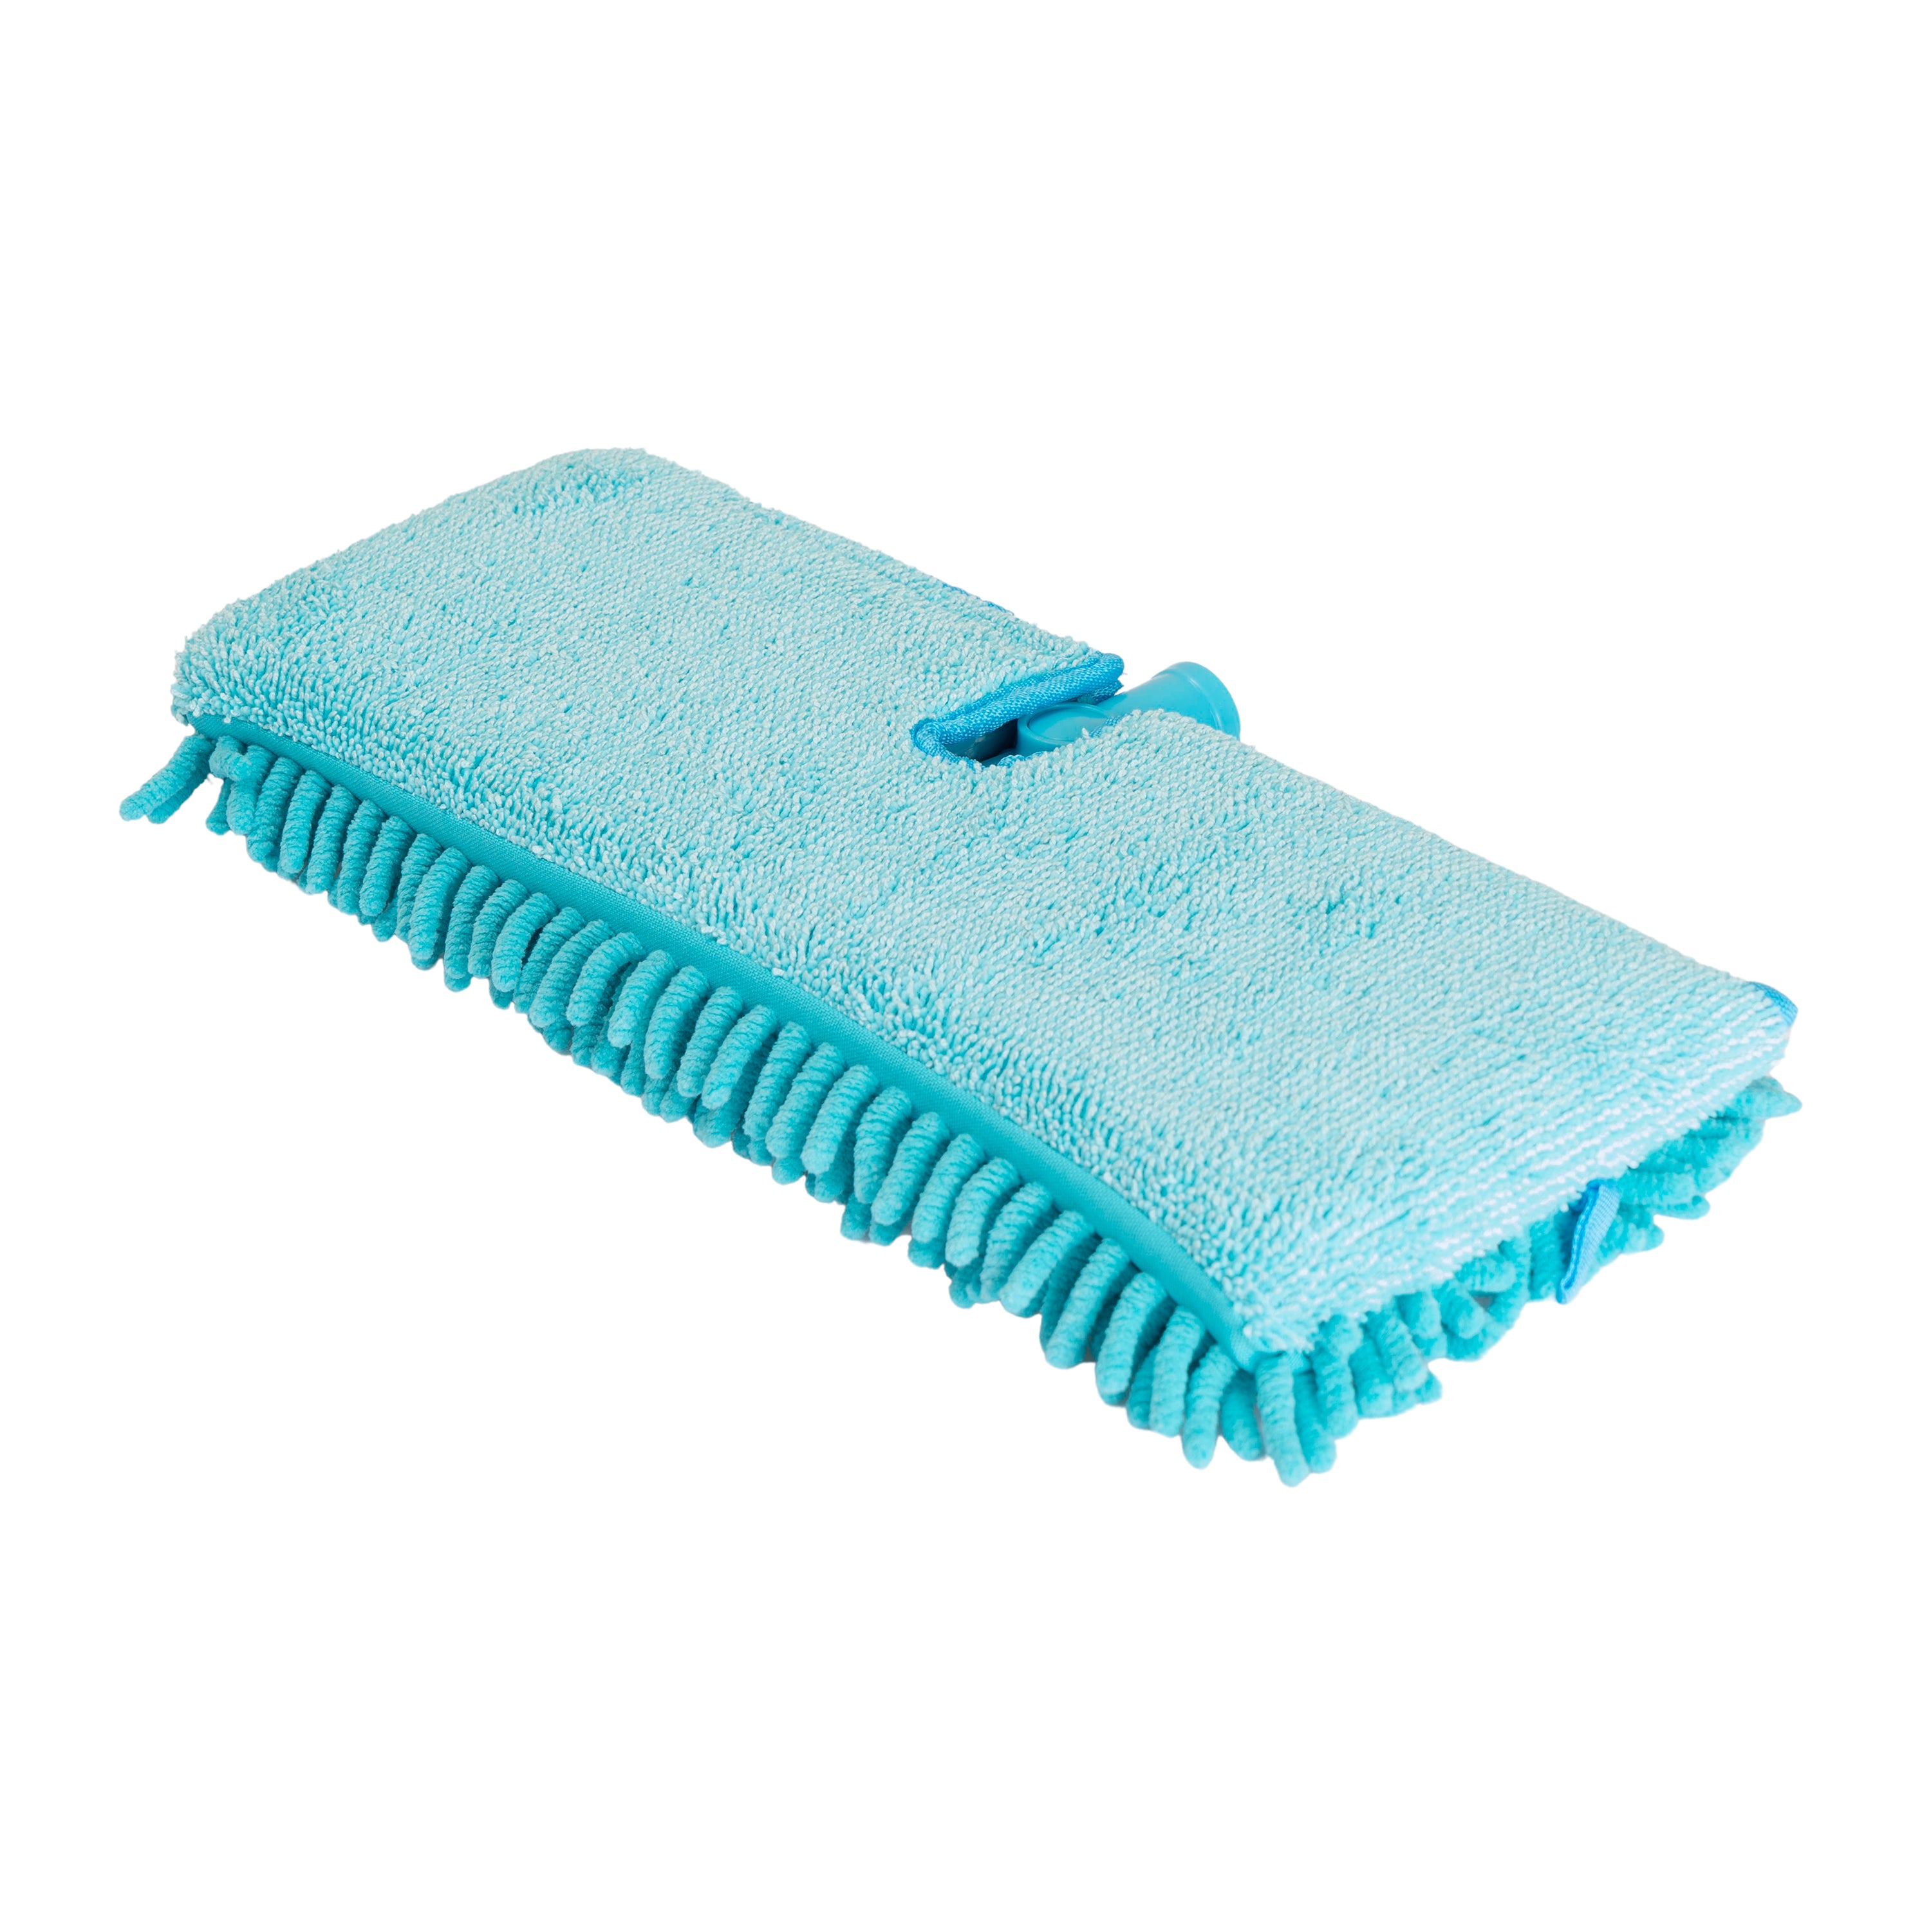 Dynamic Duo Micro Mop Replacement Head & Frame Flip Mop - Teal